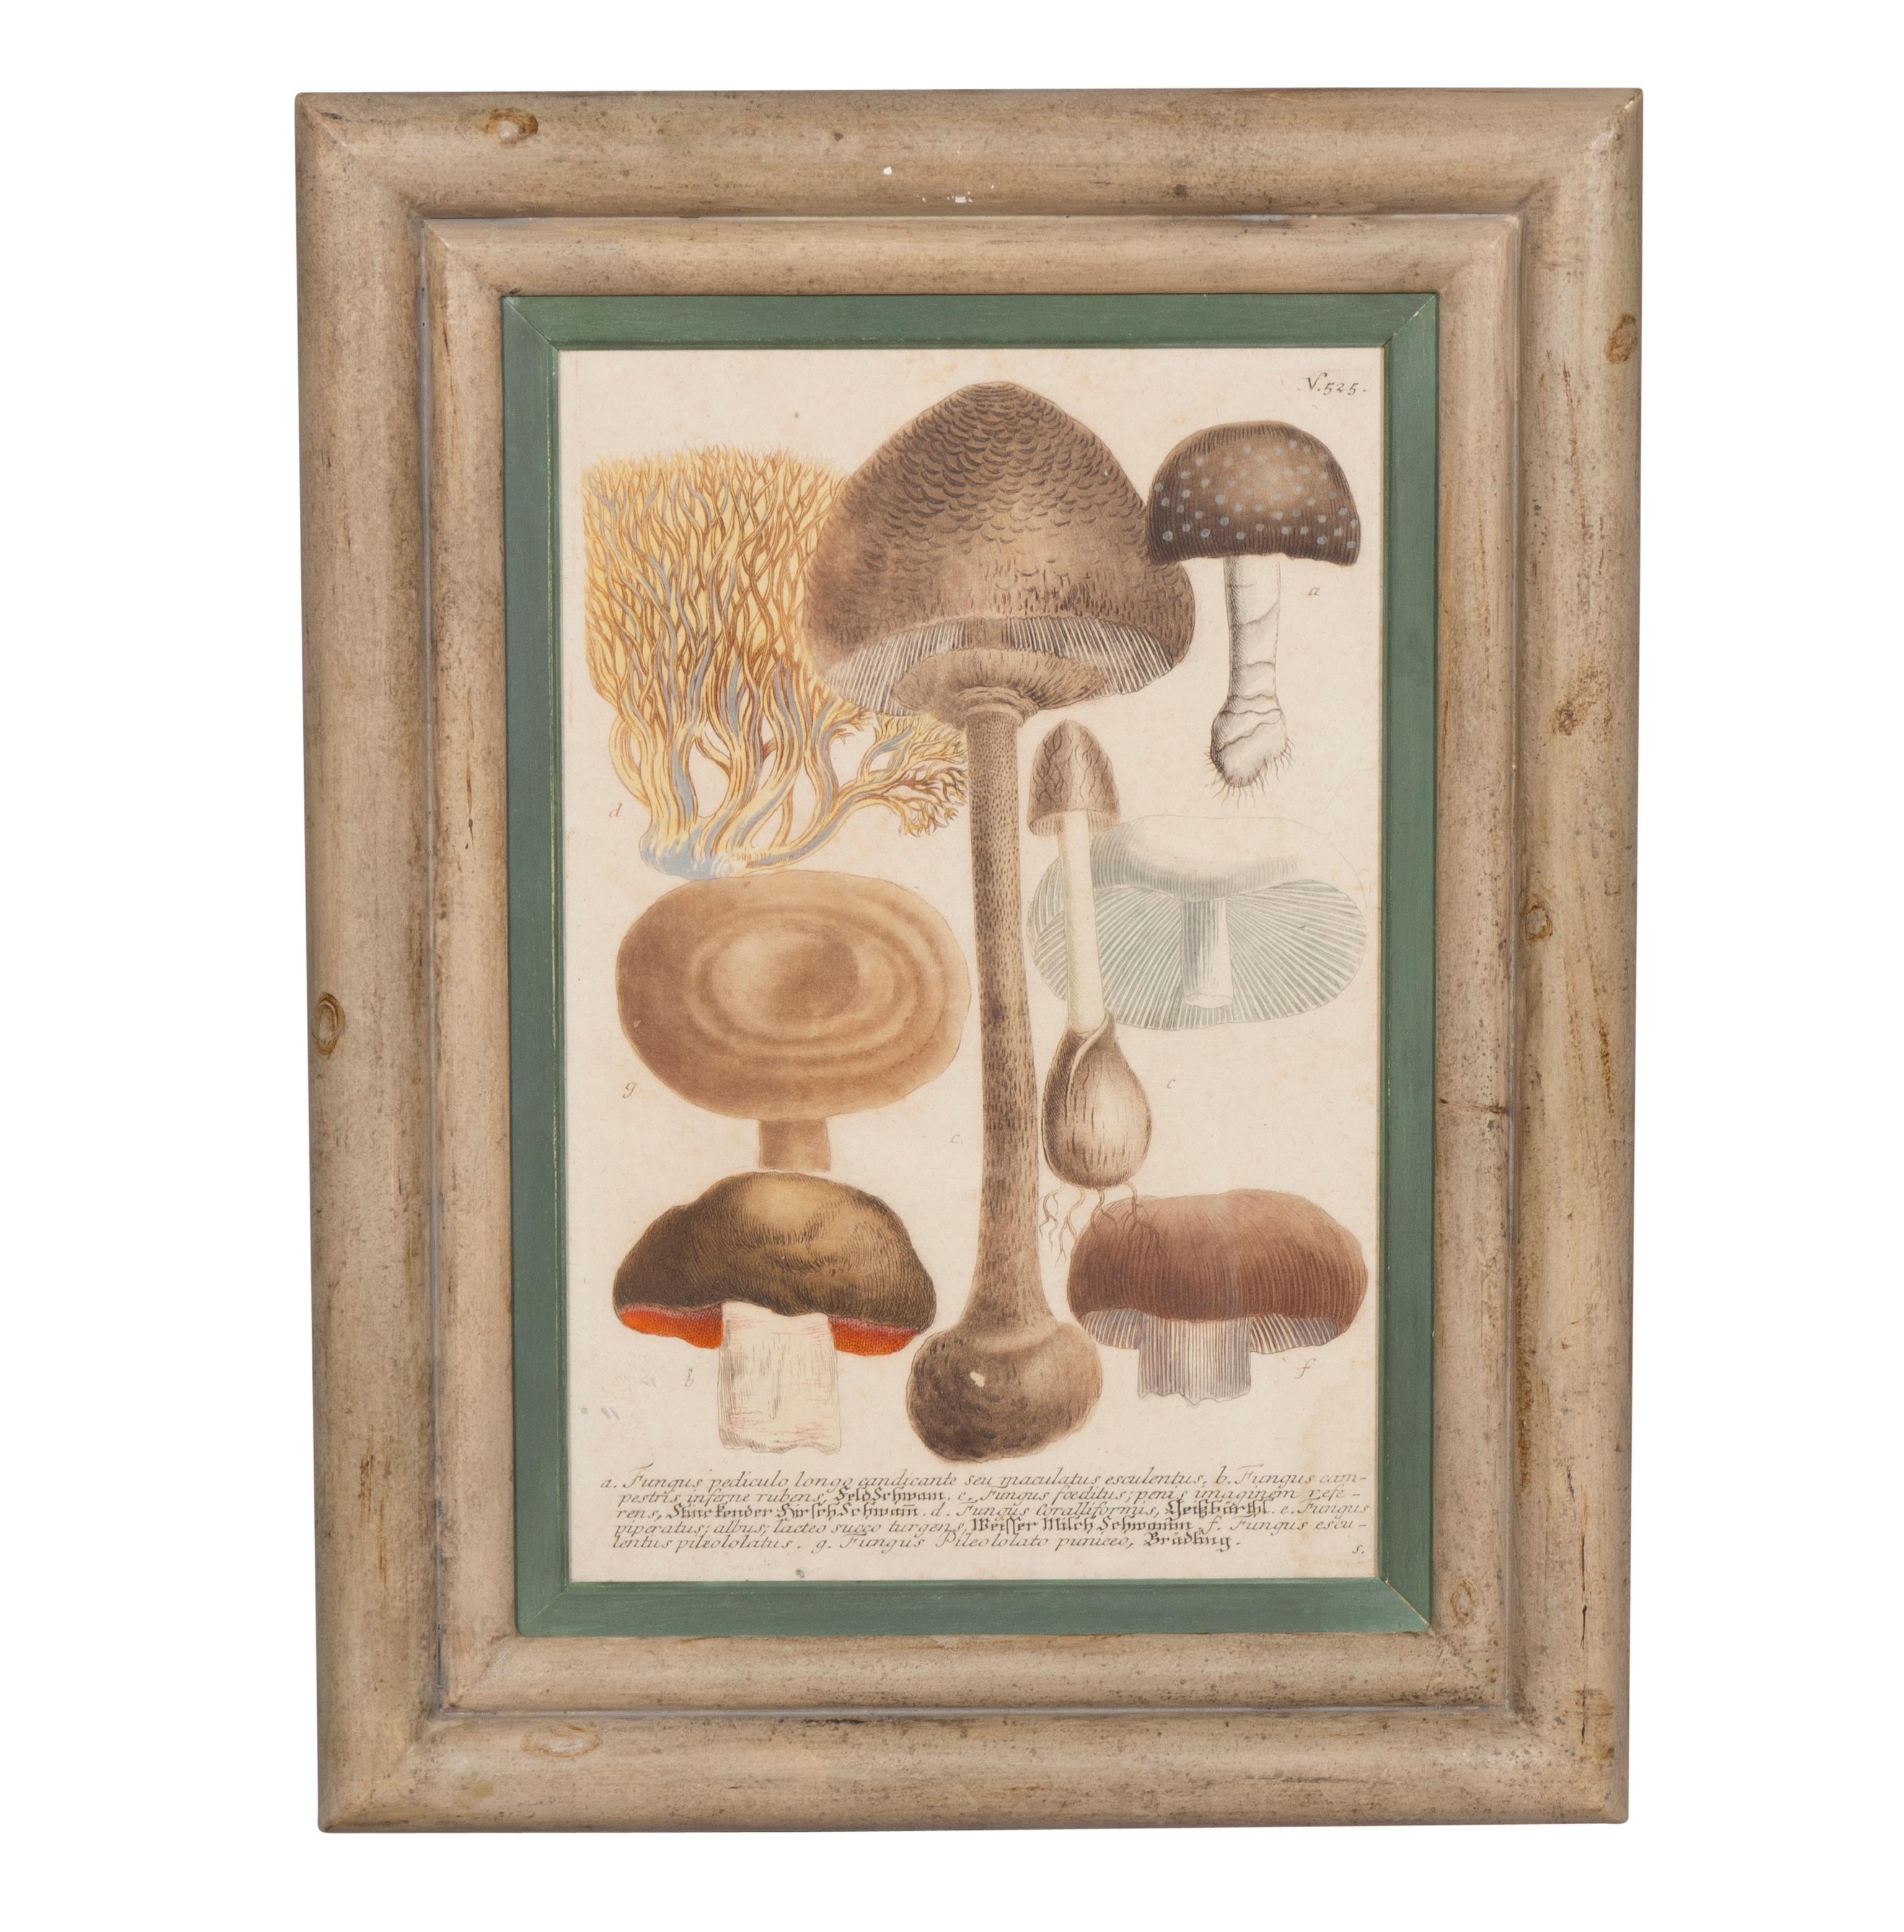 Each in a painted frame and all hand colored plate engravings with inscriptions in Latin and German.